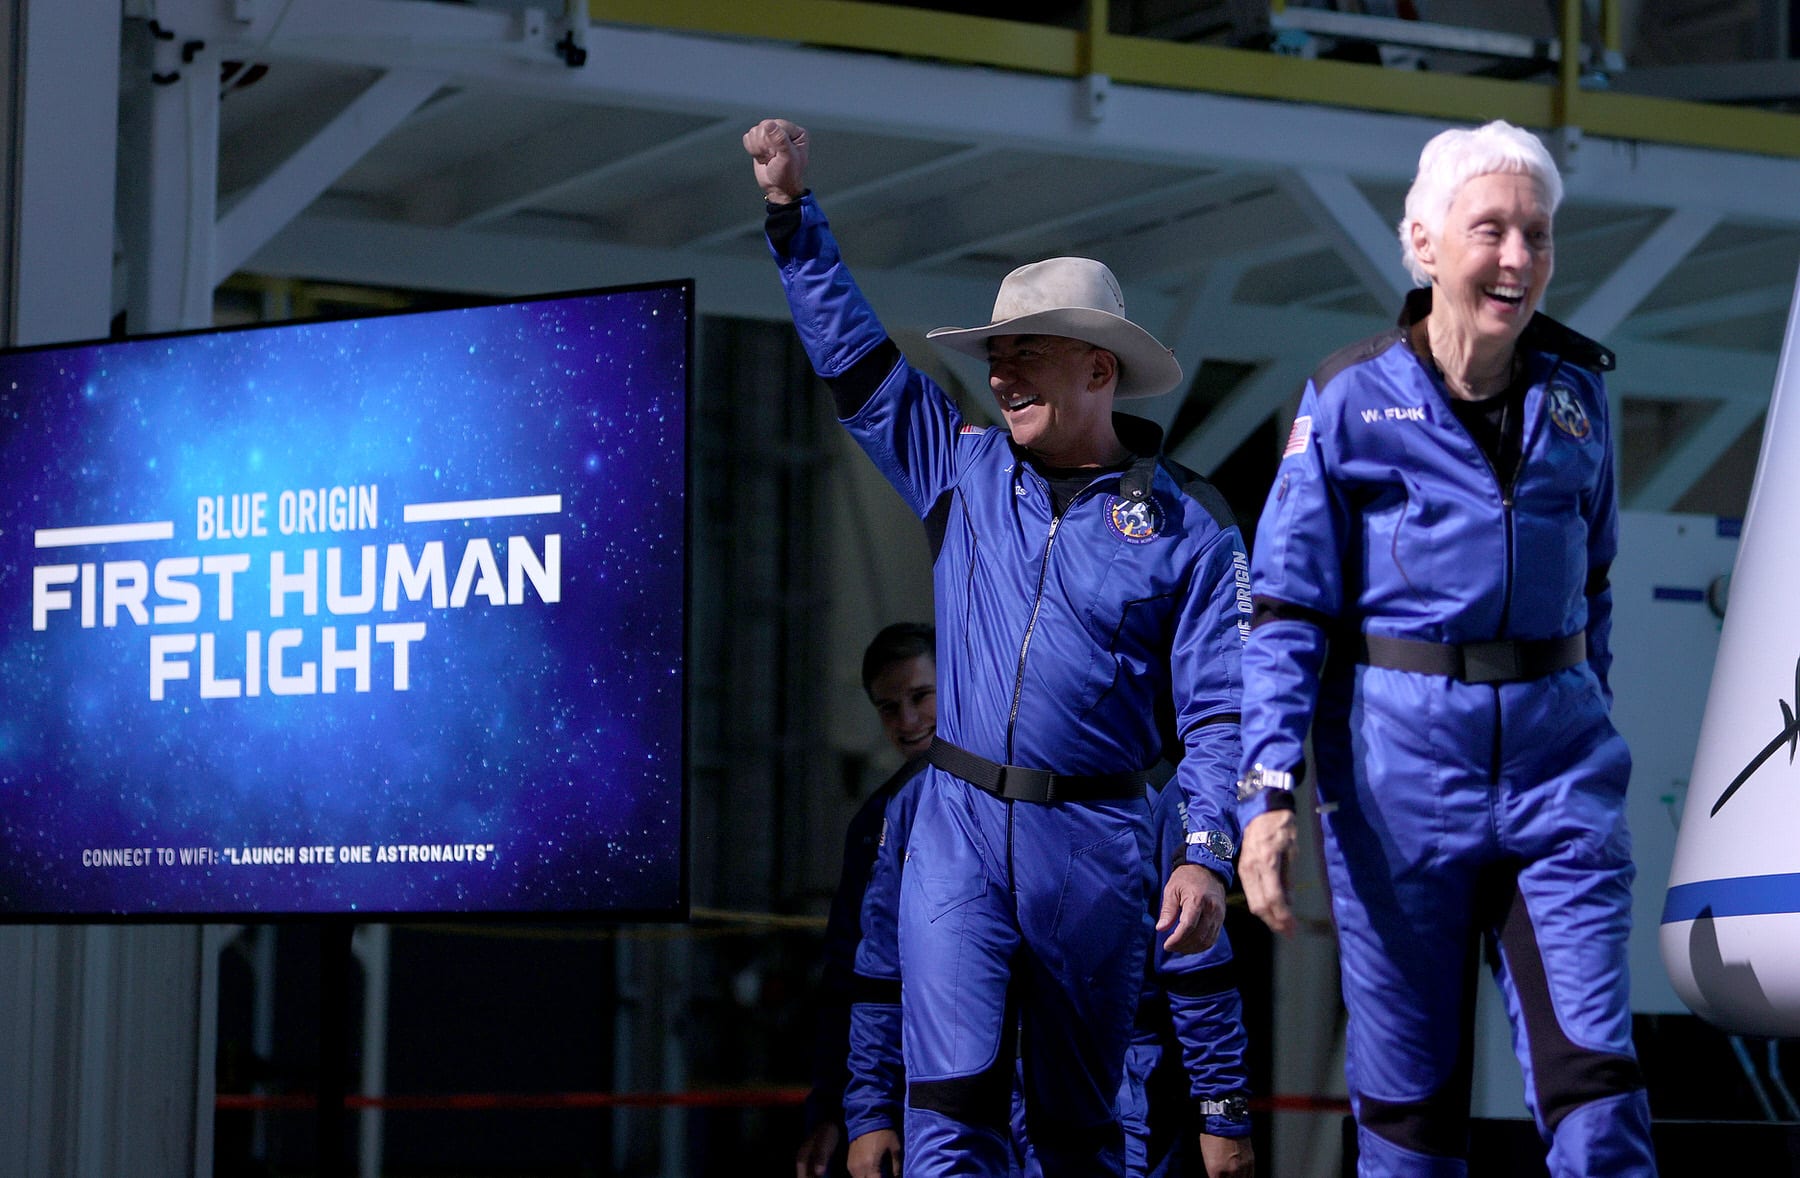 Blue Origin’s New Shepard crew (L-R) Jeff Bezos and Wally Funk arrive for a press conference after flying into space.